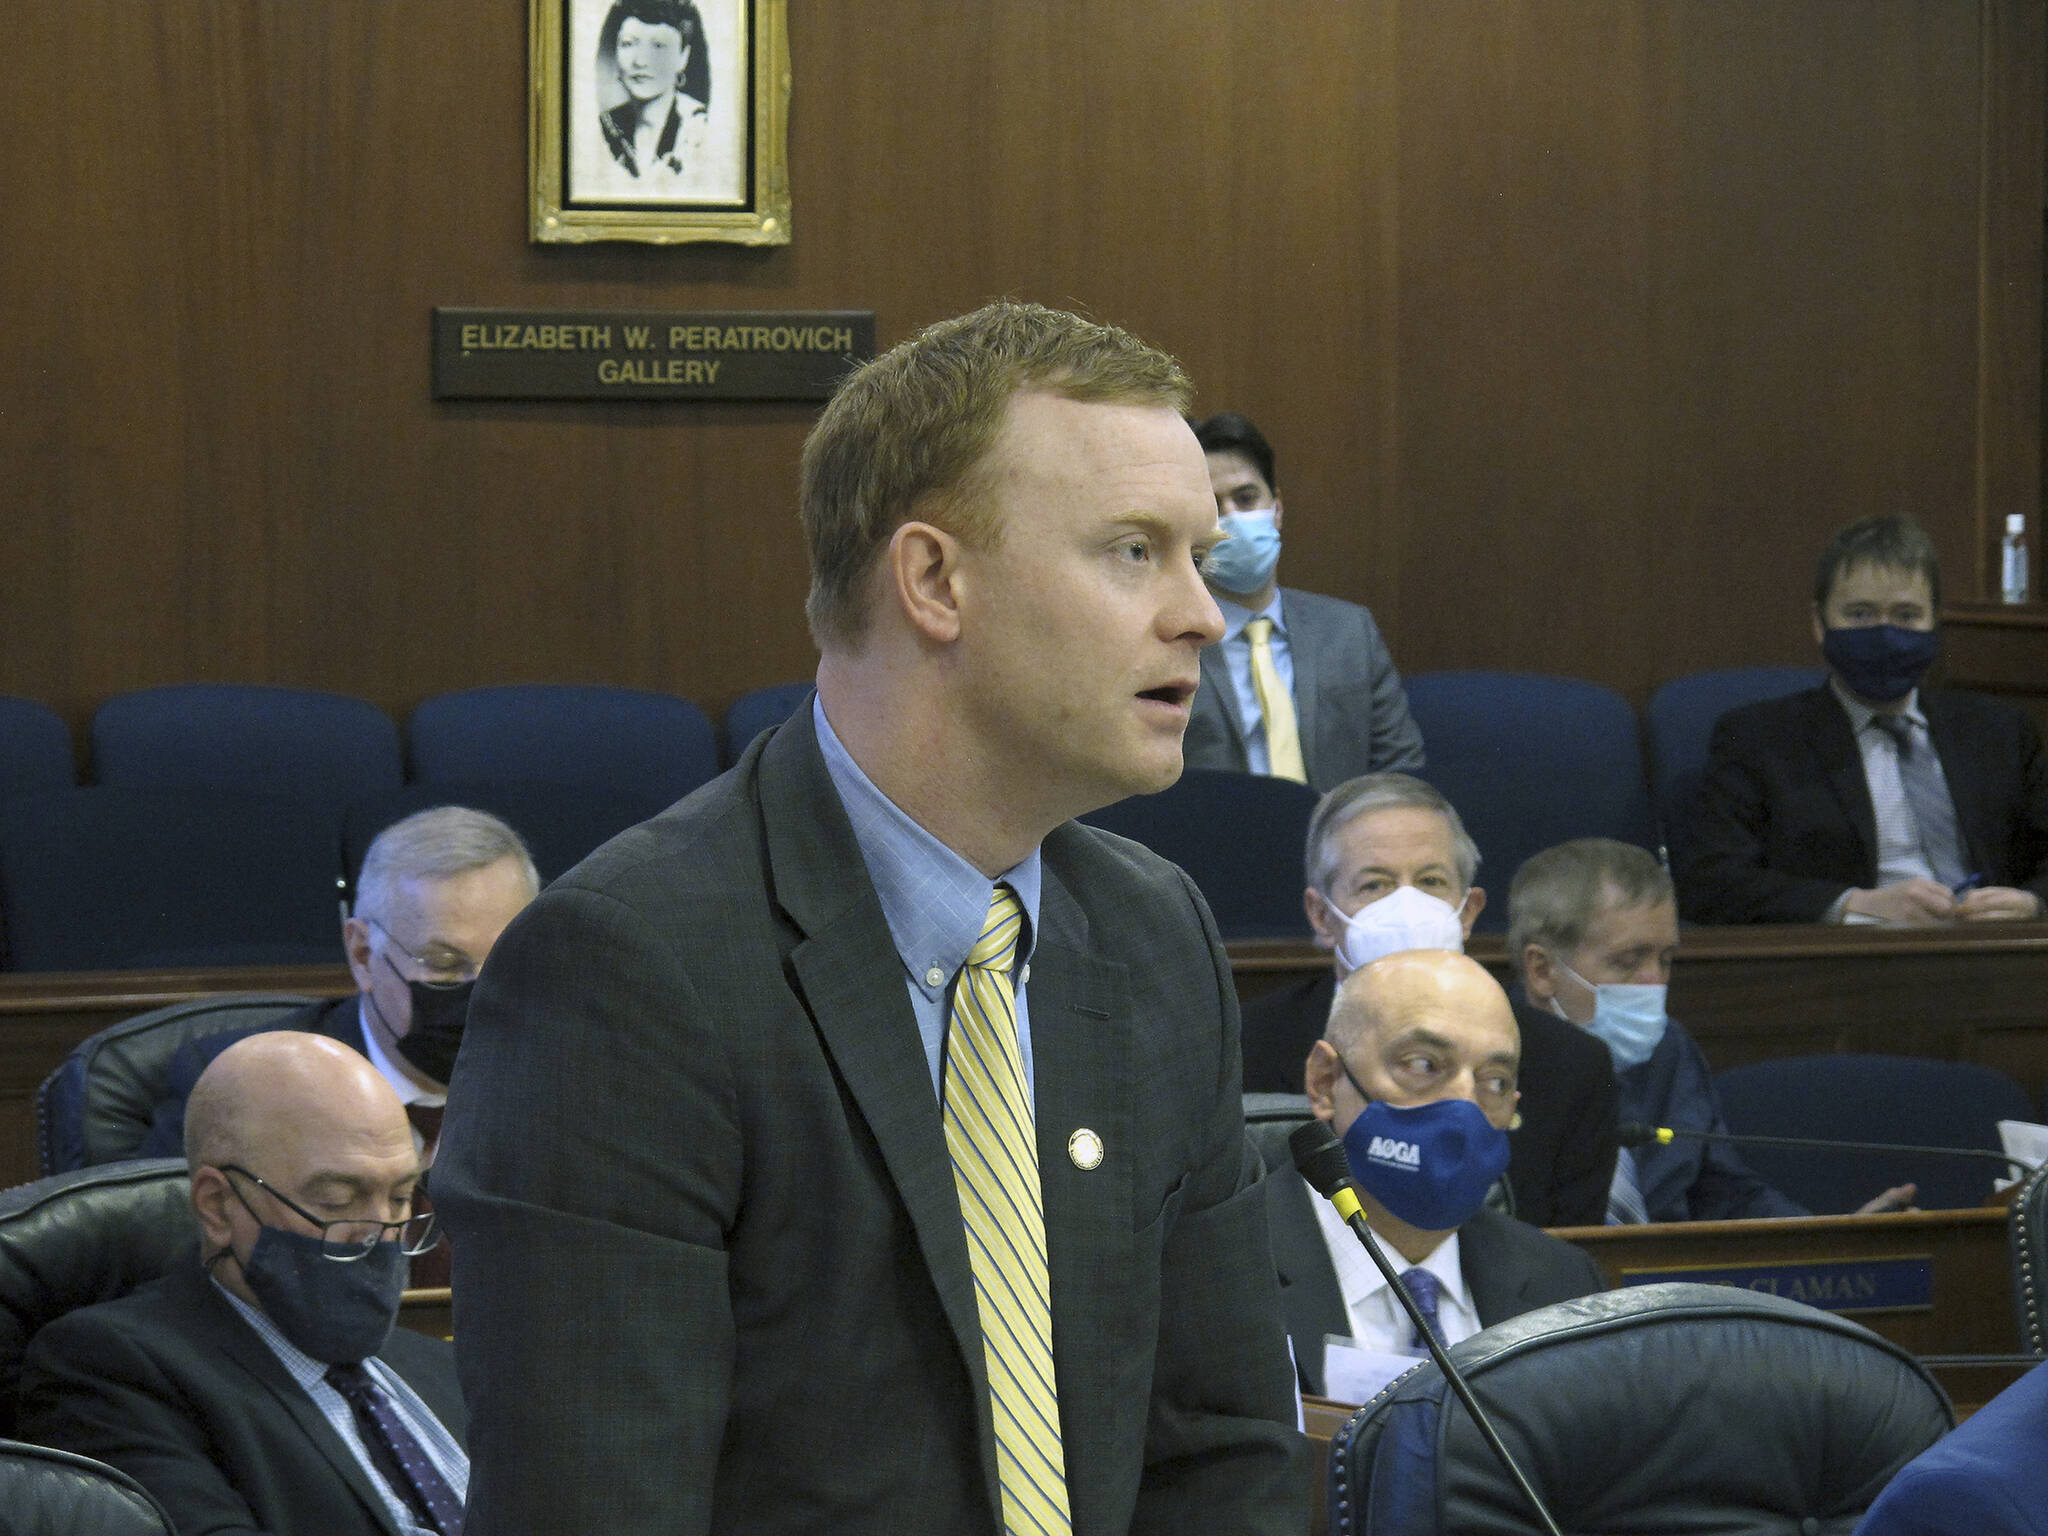 Alaska Republican state Rep. David Eastman speaks on the floor of the Alaska House on Jan. 31, 2022, in Juneau, Alaska. A lawyer said in opening arguments Tuesday, Dec. 13 in a case against Eastman that the Alaska lawmaker is unfit to hold office because he’s a member of the far-right Oath Keepers, a group that has either advocated or engaged in concrete action to overthrow the U.S. government. (AP Photo/Becky Bohrer, File)